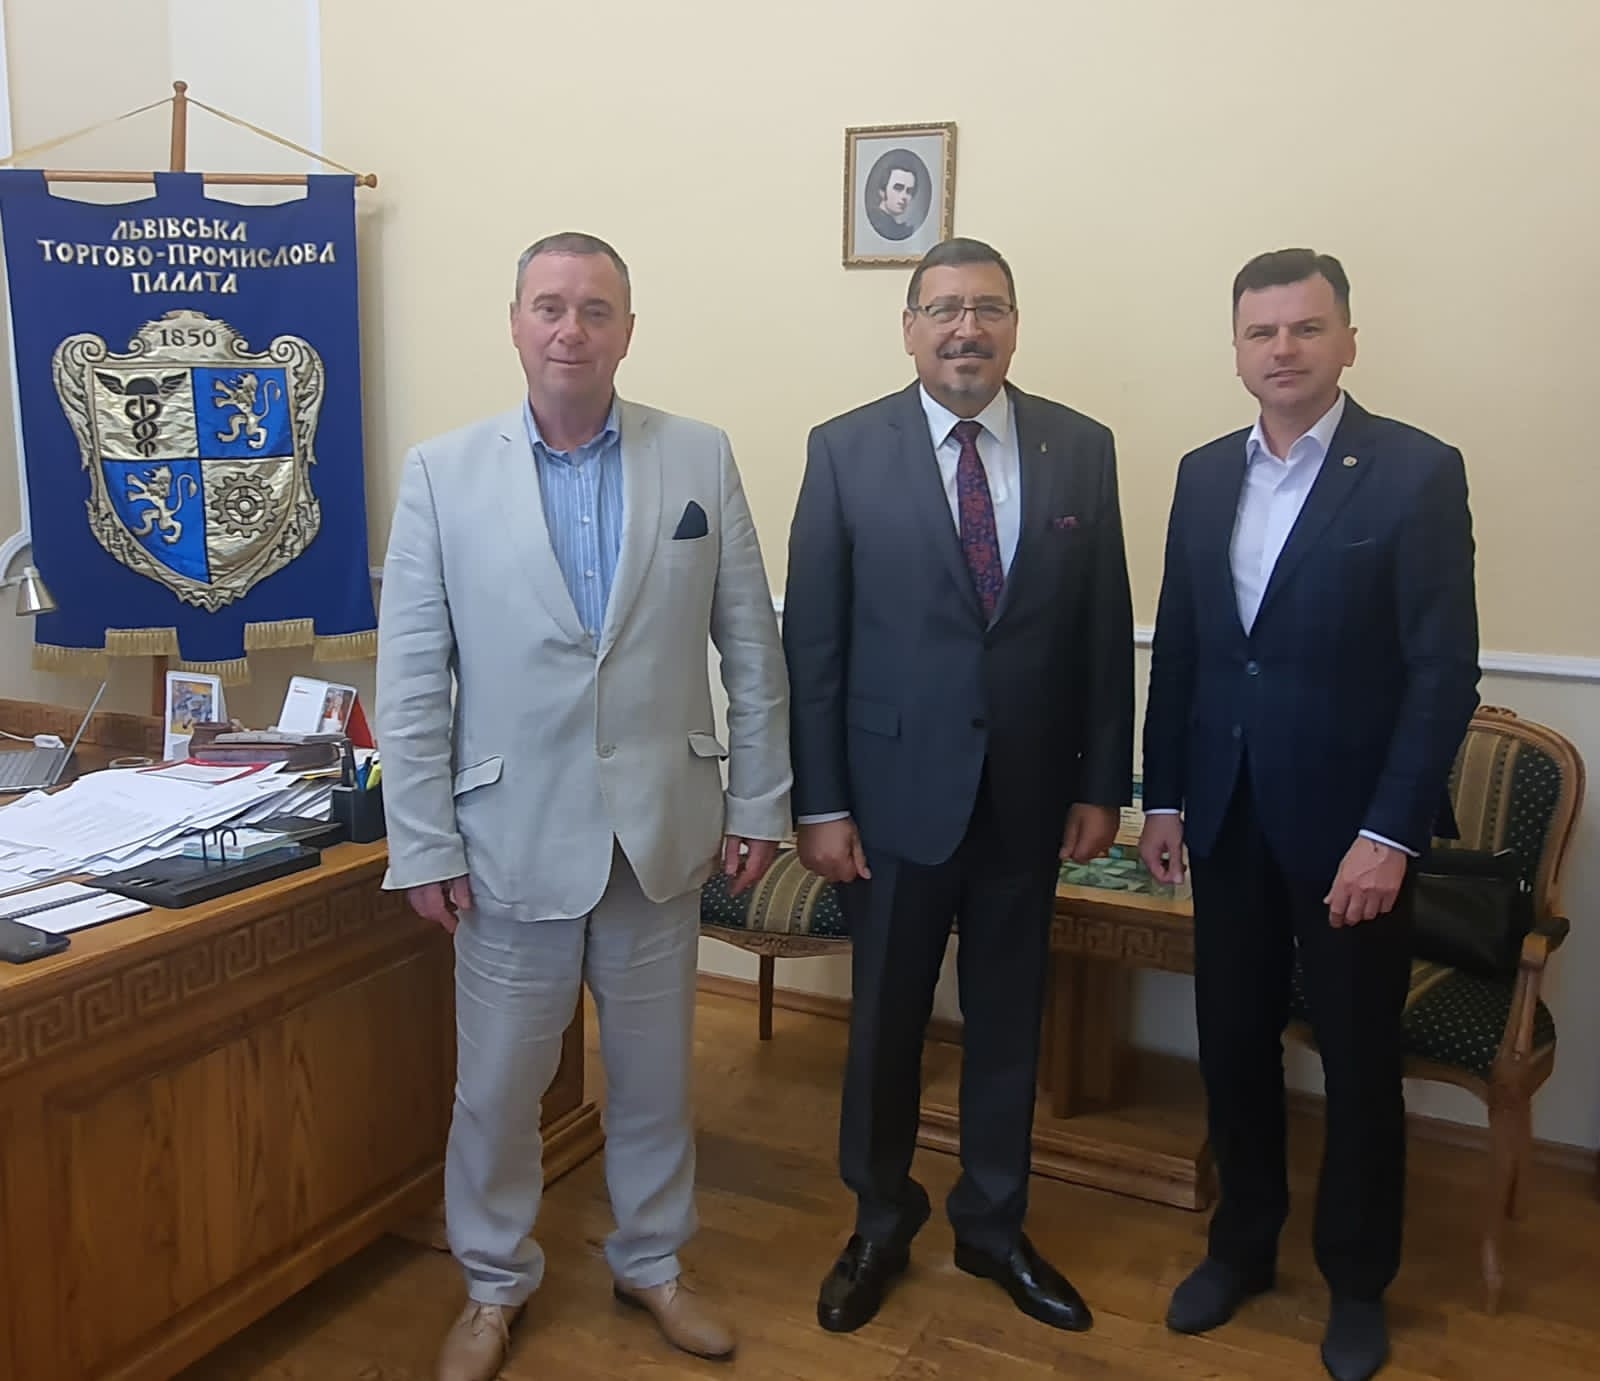 H.E. Ambassador Hashem Dajani at the meeting with the President of the Lviv Chamber of Commerce and Industry Mr. Dmytro Aftanas and the President of the Ivano-Frankivsk Chamber of Commerce and Industry Mr. Andriy Levkovych